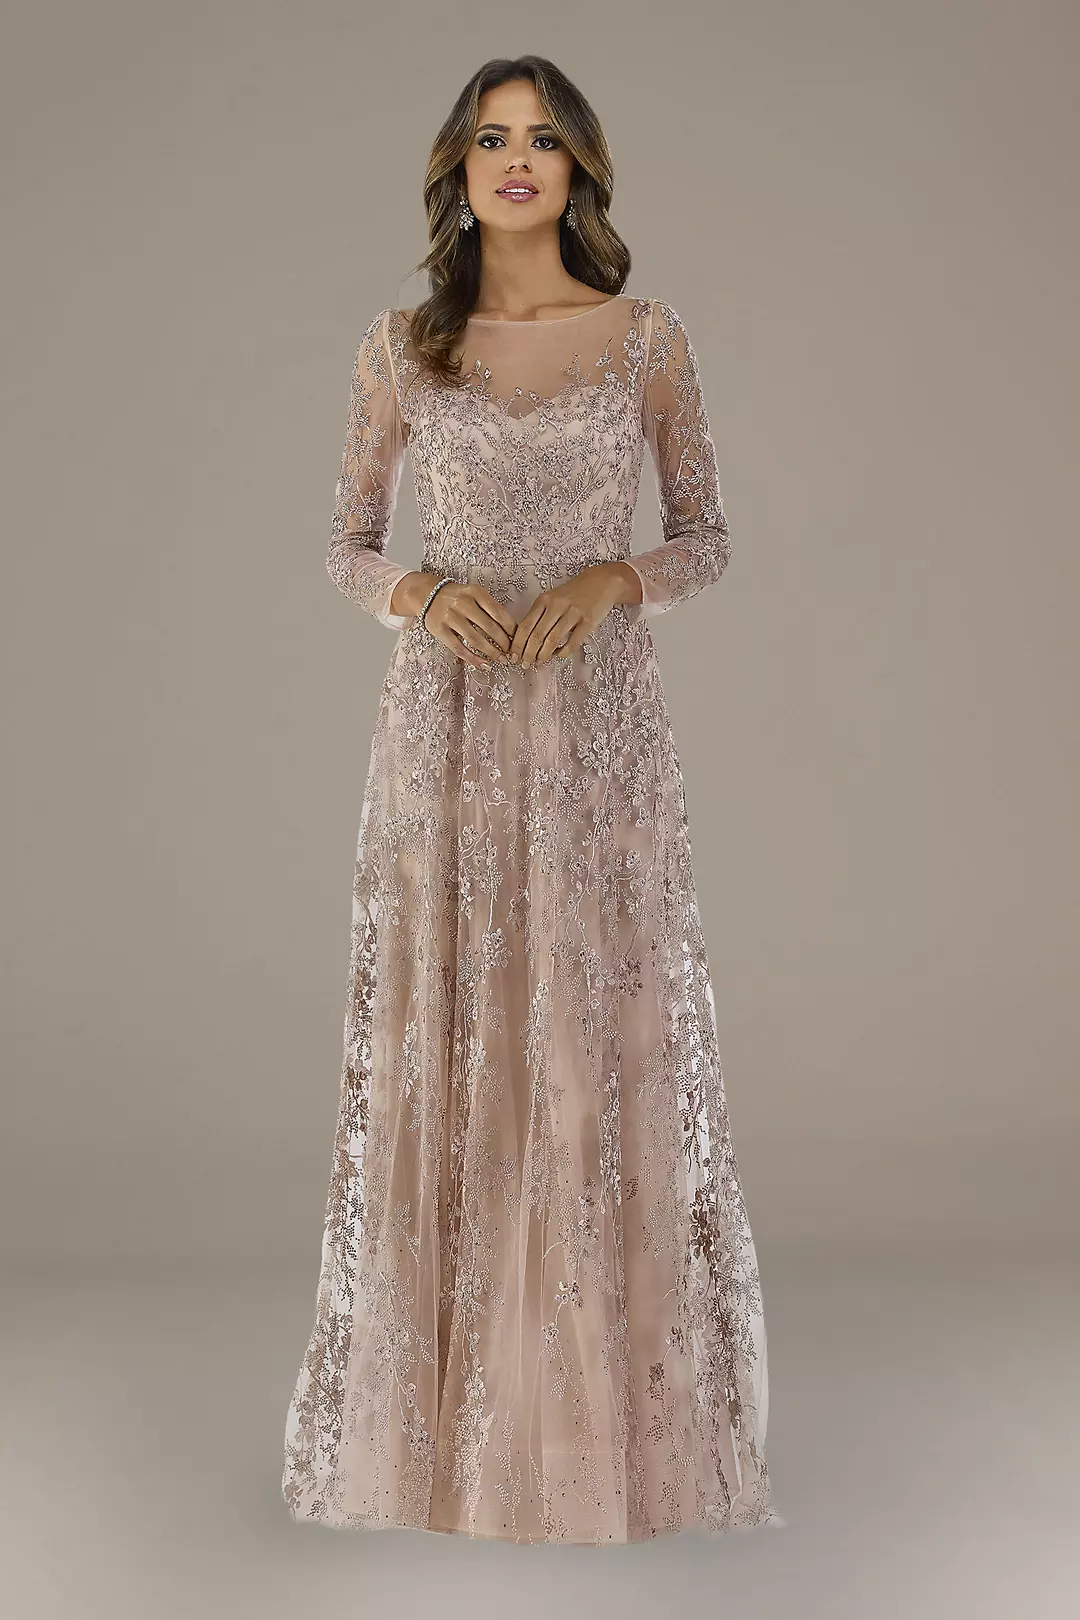 Lara Evette Lace A-Line Long Sleeve Gown Image